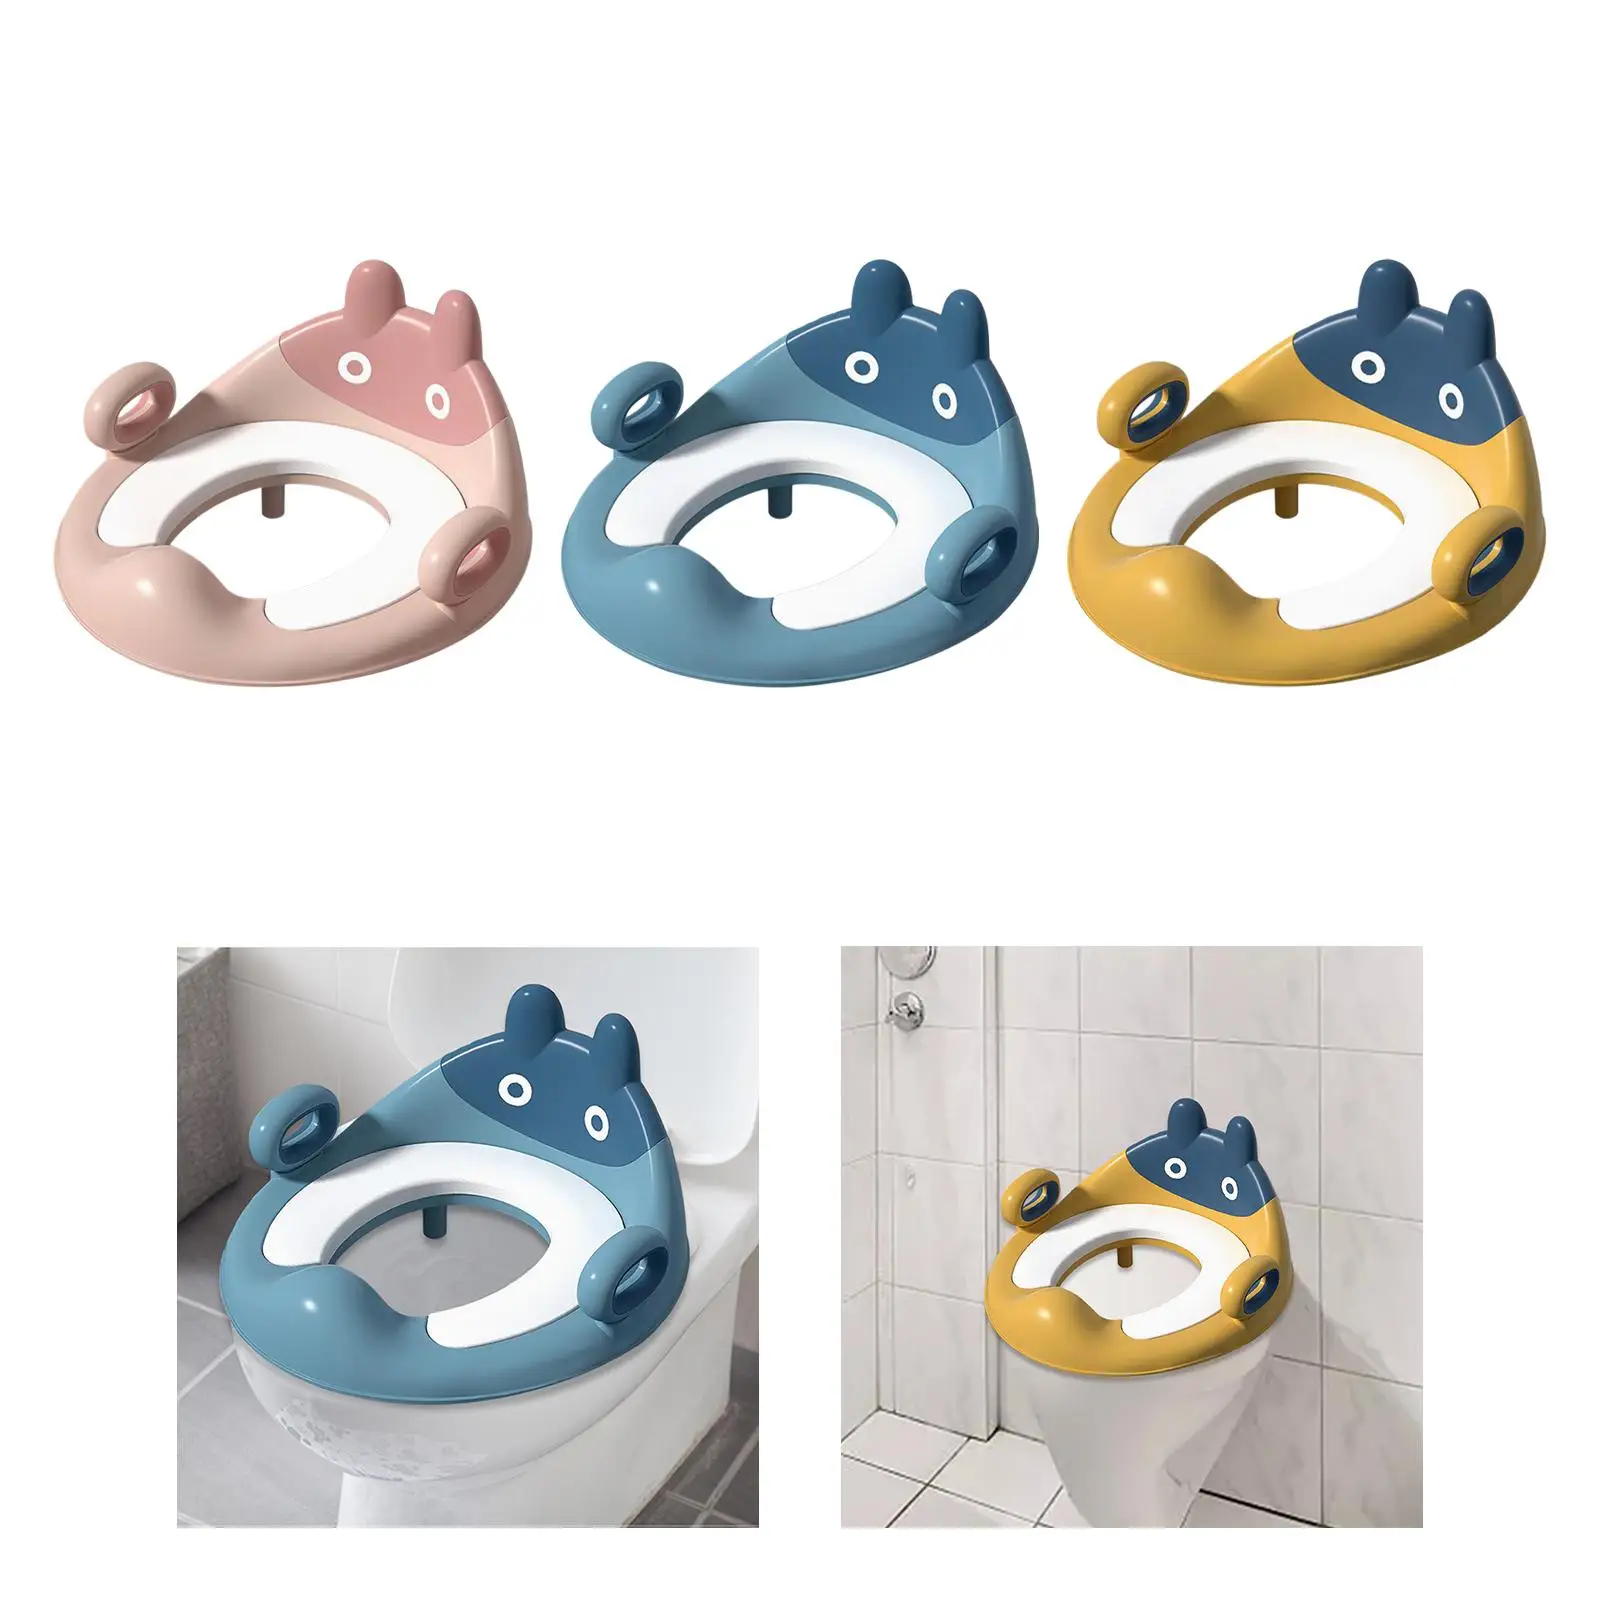 Potty Train Toilet Seat Space Saving with Handles Fits Round & Oval Toilets Nonslip Training Toilet for for Kids Child Girl